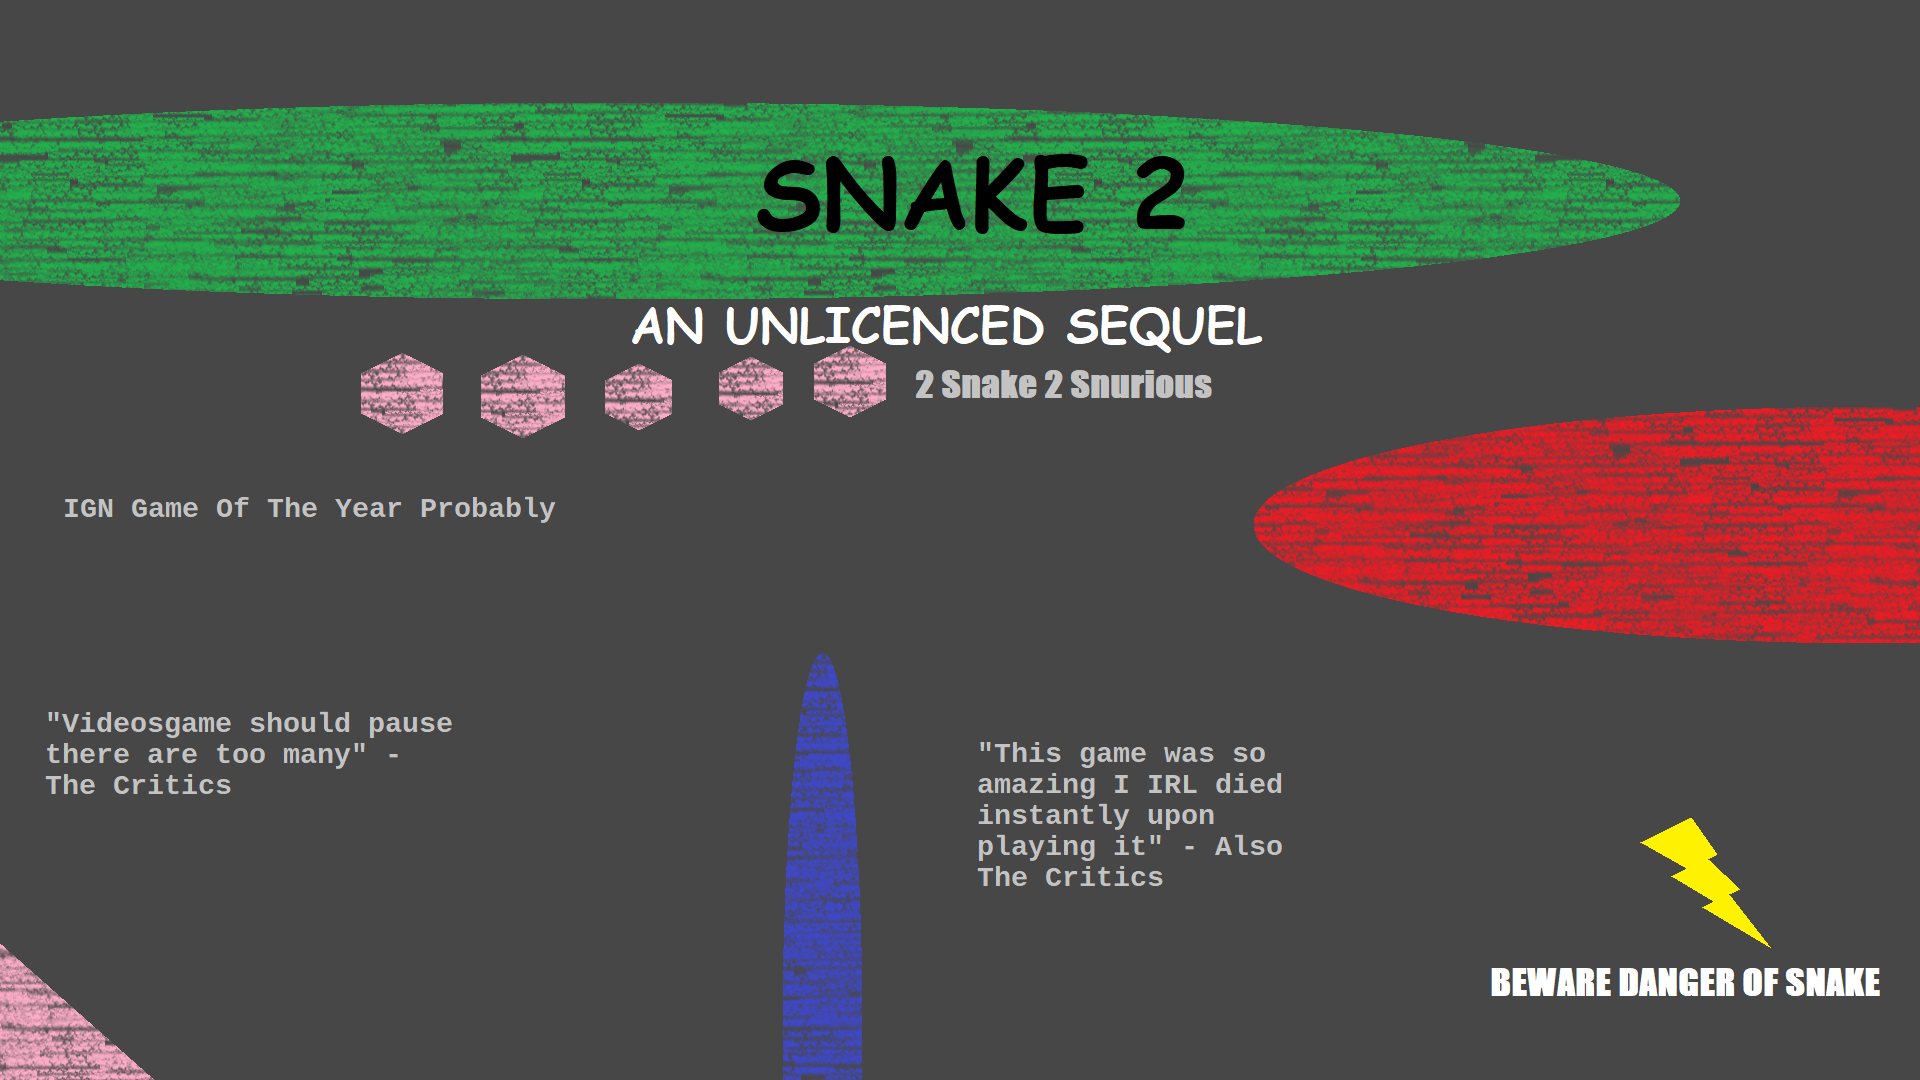 Snake 2: An Unlicensed Sequel: 2 Snake 2 Snurious